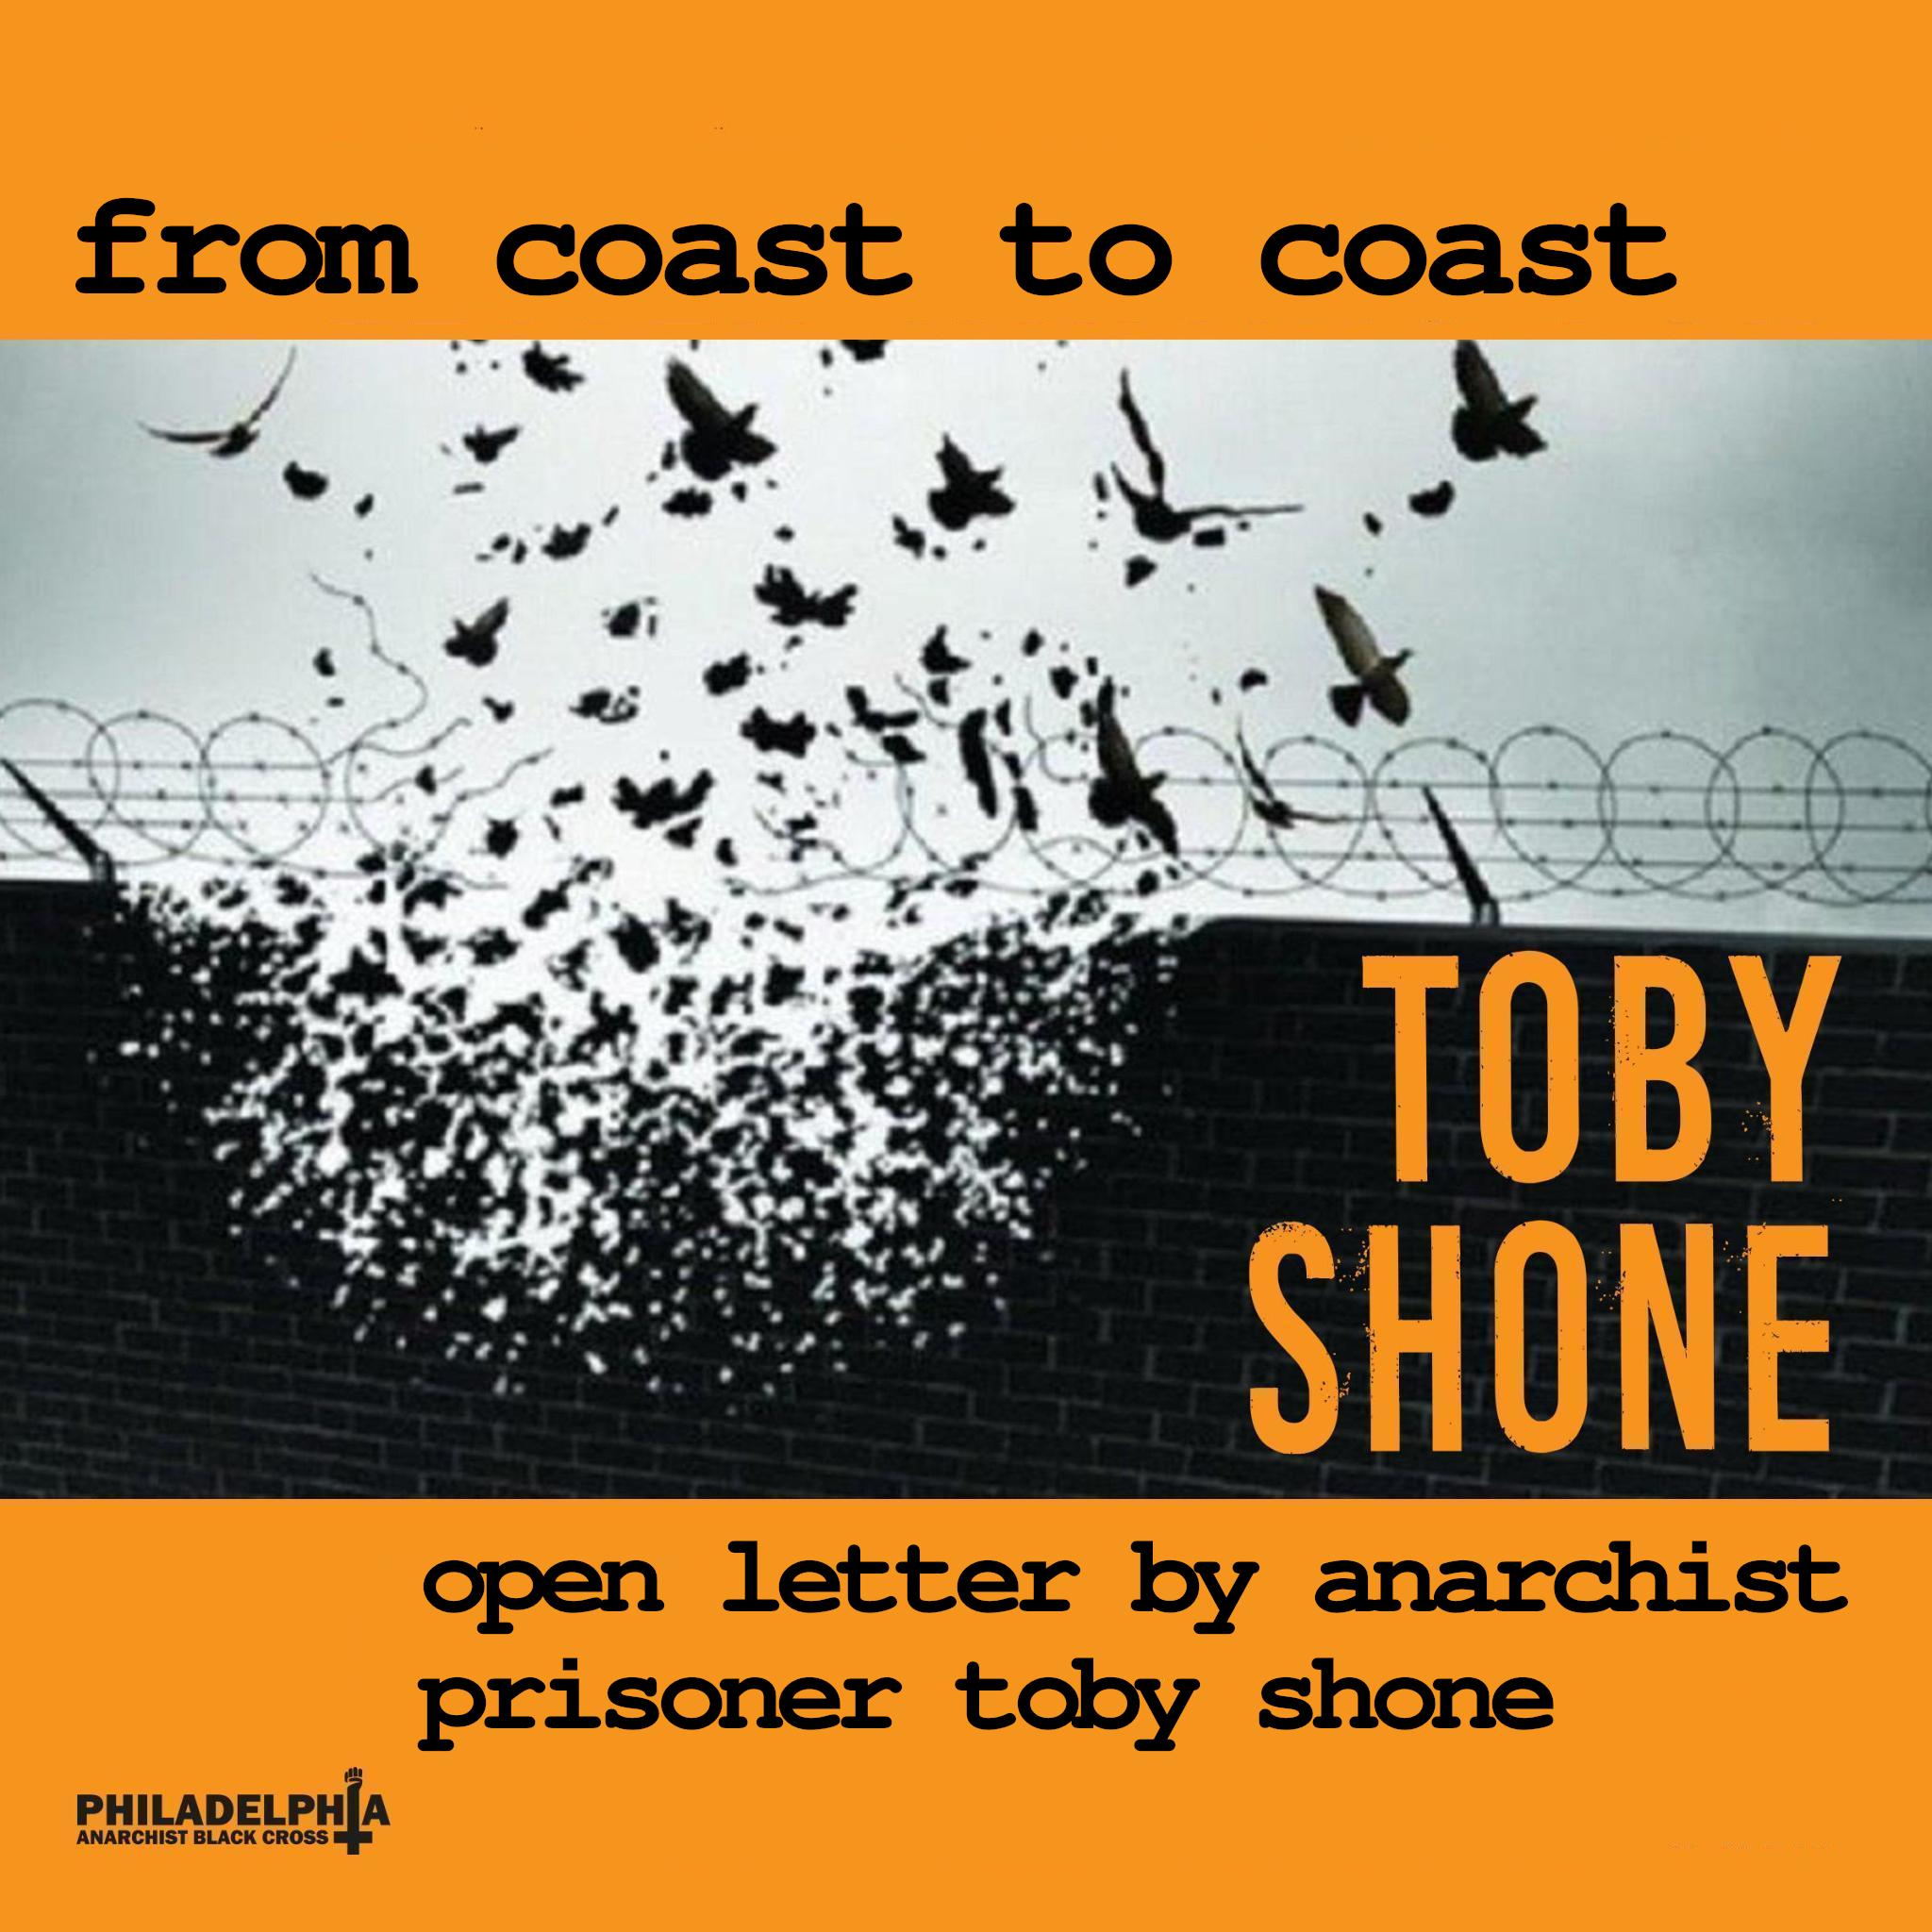 From Coast to Coast: Open Letter by Anarchist Prisoner Toby Shone